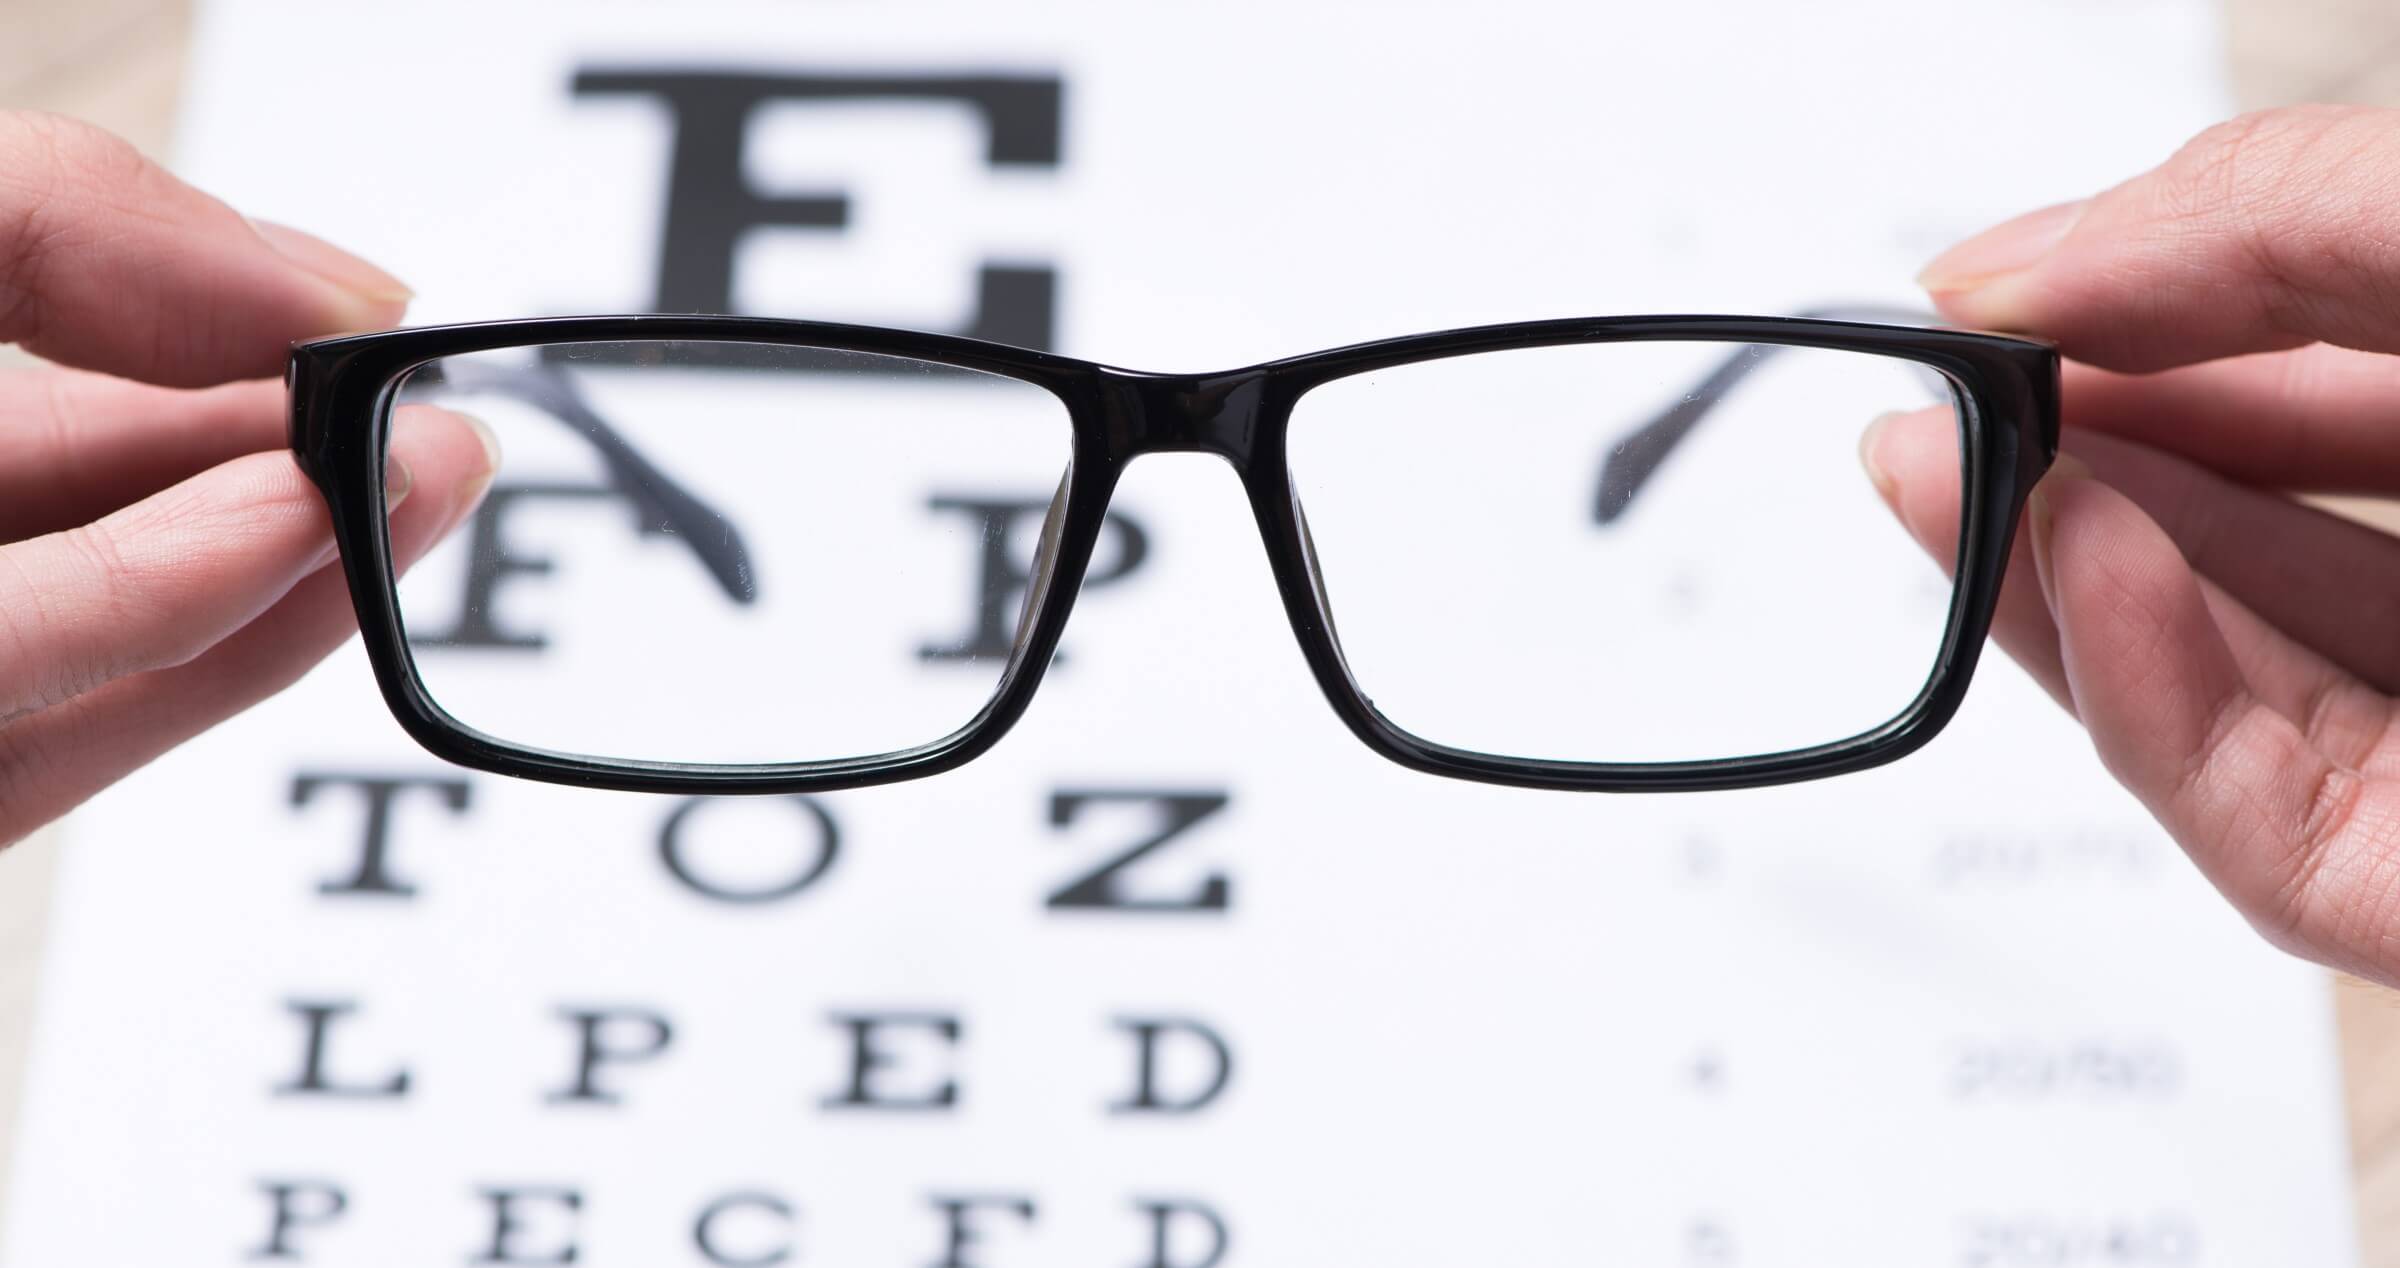 Visual acuity chart with different sized letters